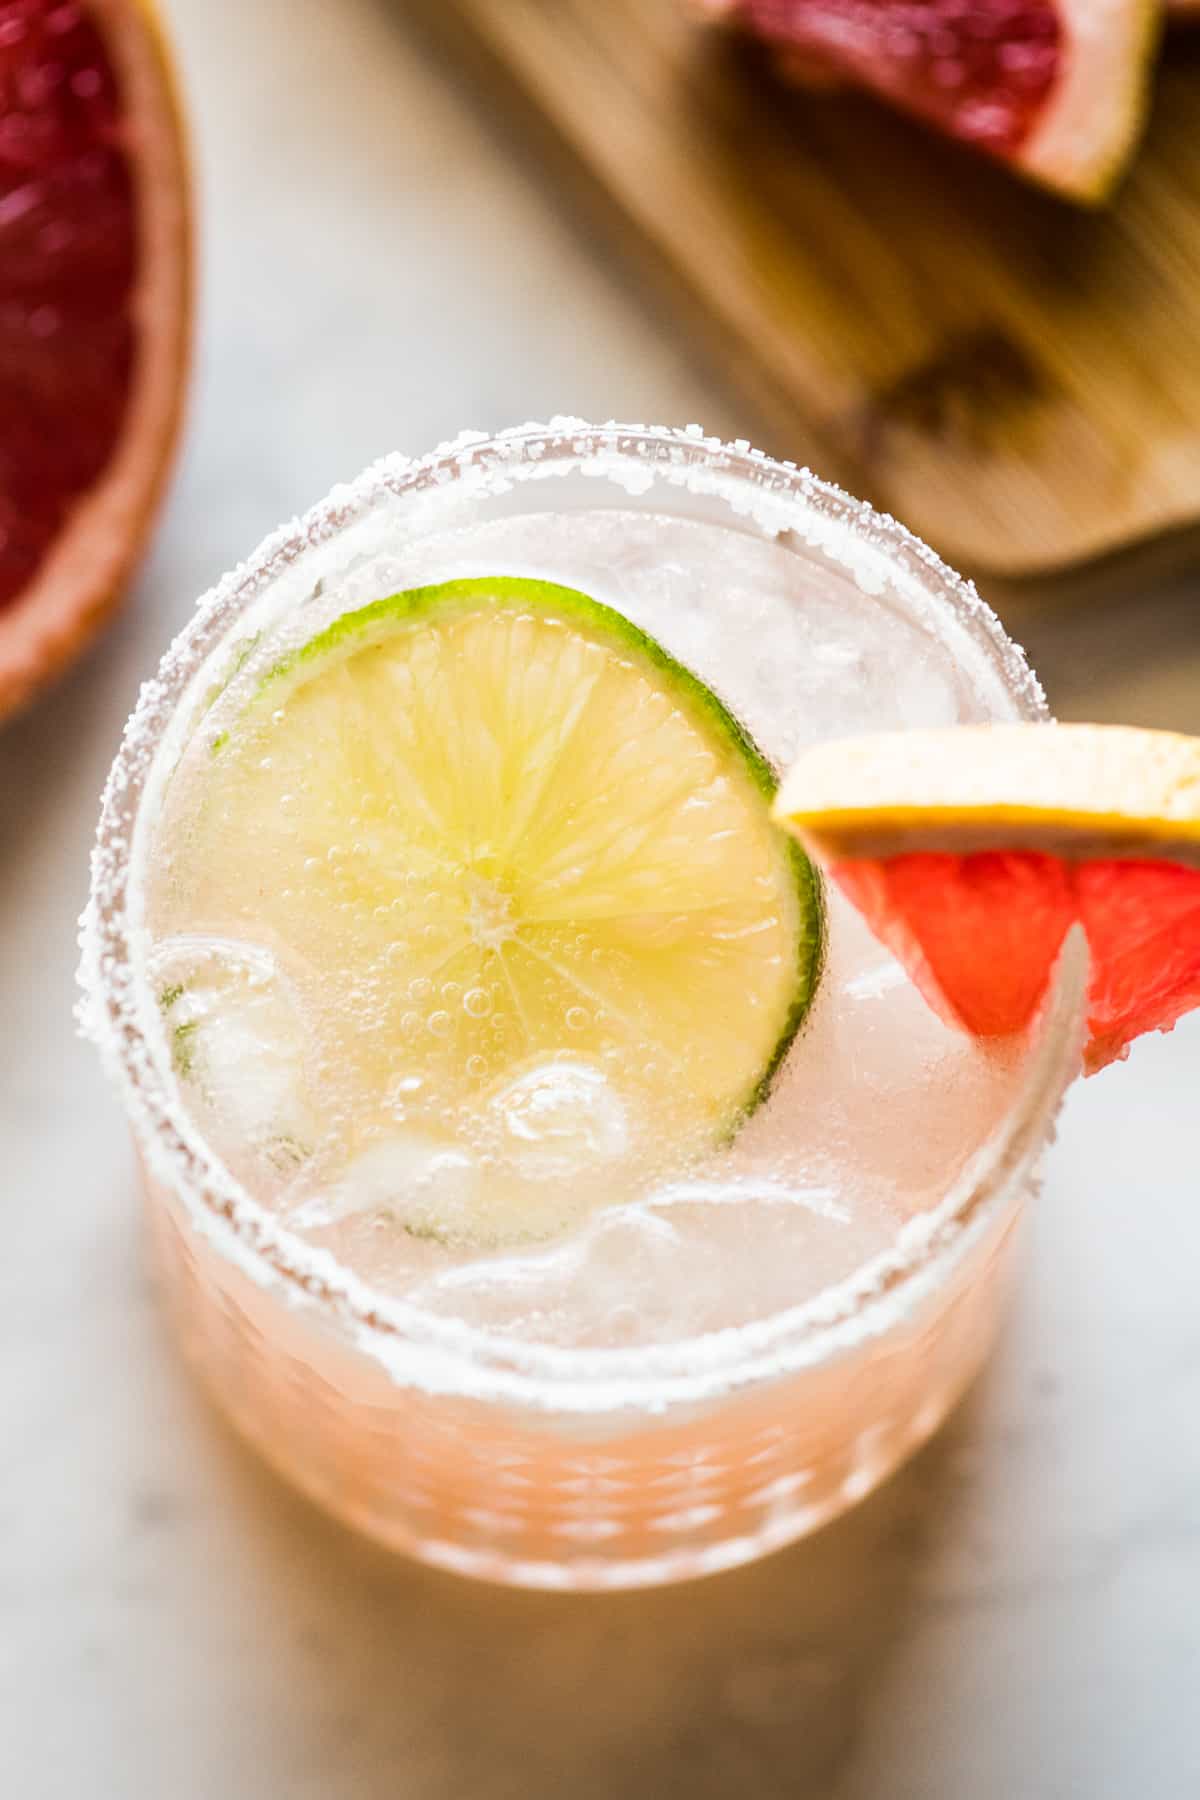 A Paloma drink in an iced glass with a slice of fresh lime and a grapefruit wedge.